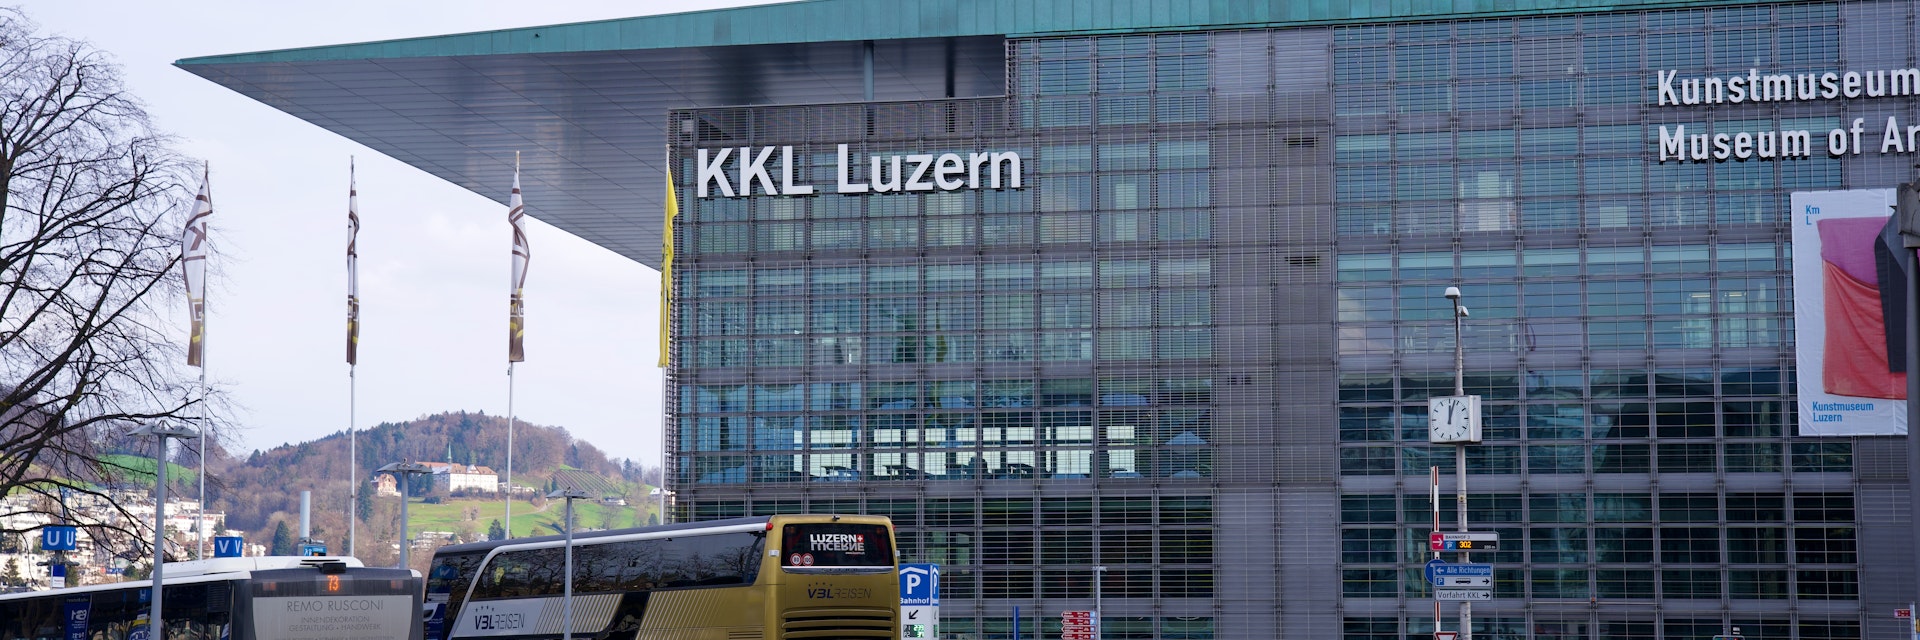 KKL culture and convention centre and Museum of Art in Luzern.